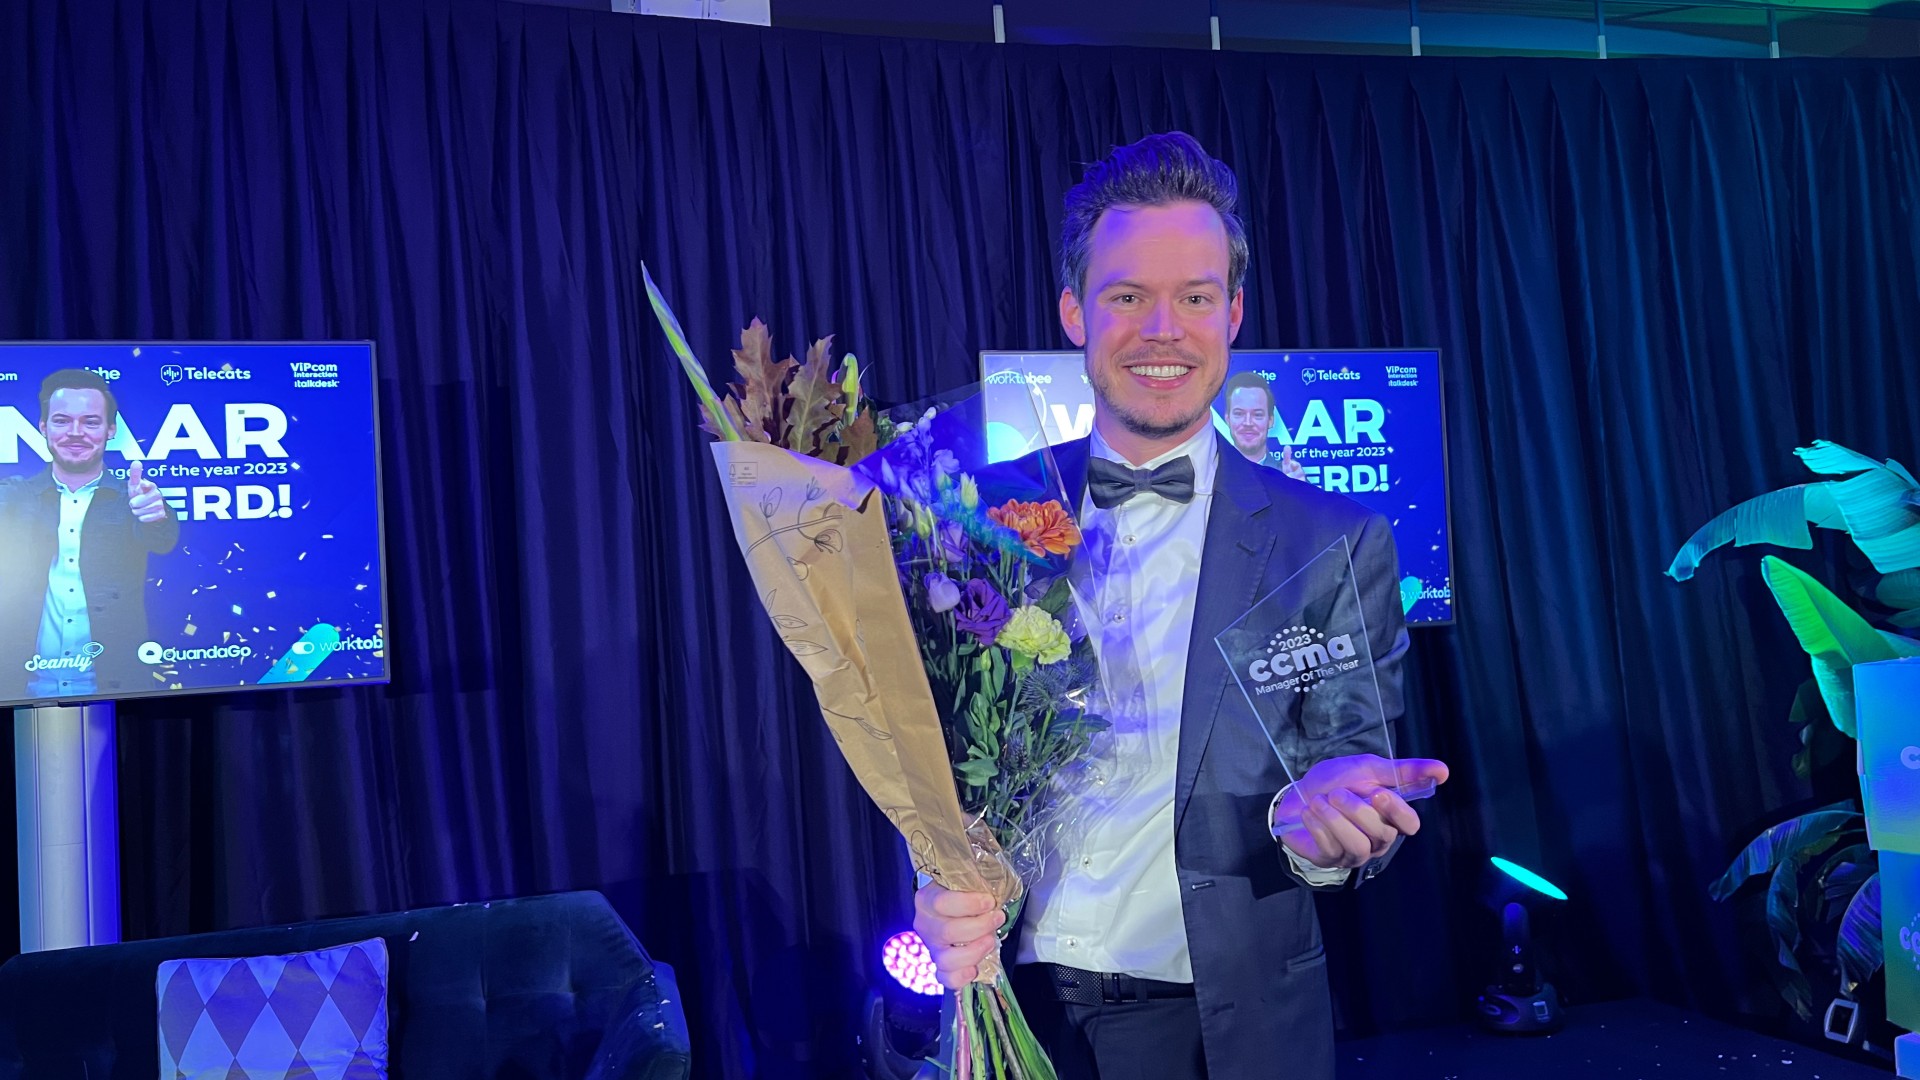 René Kloppenburg (KPN) is Manager of the Year 2023